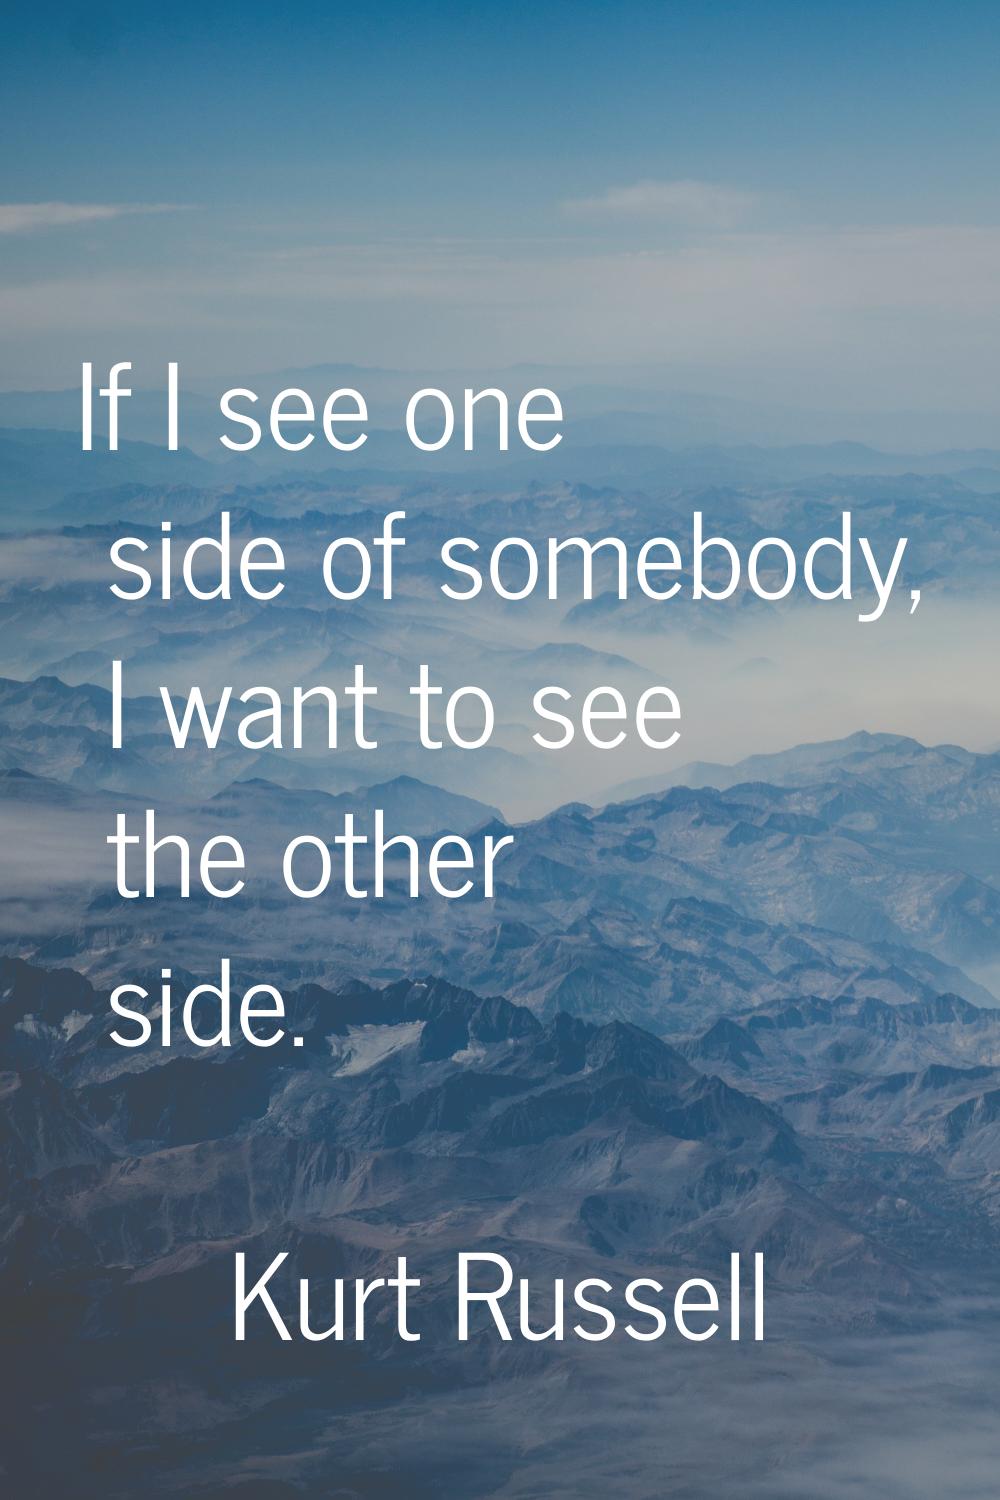 If I see one side of somebody, I want to see the other side.